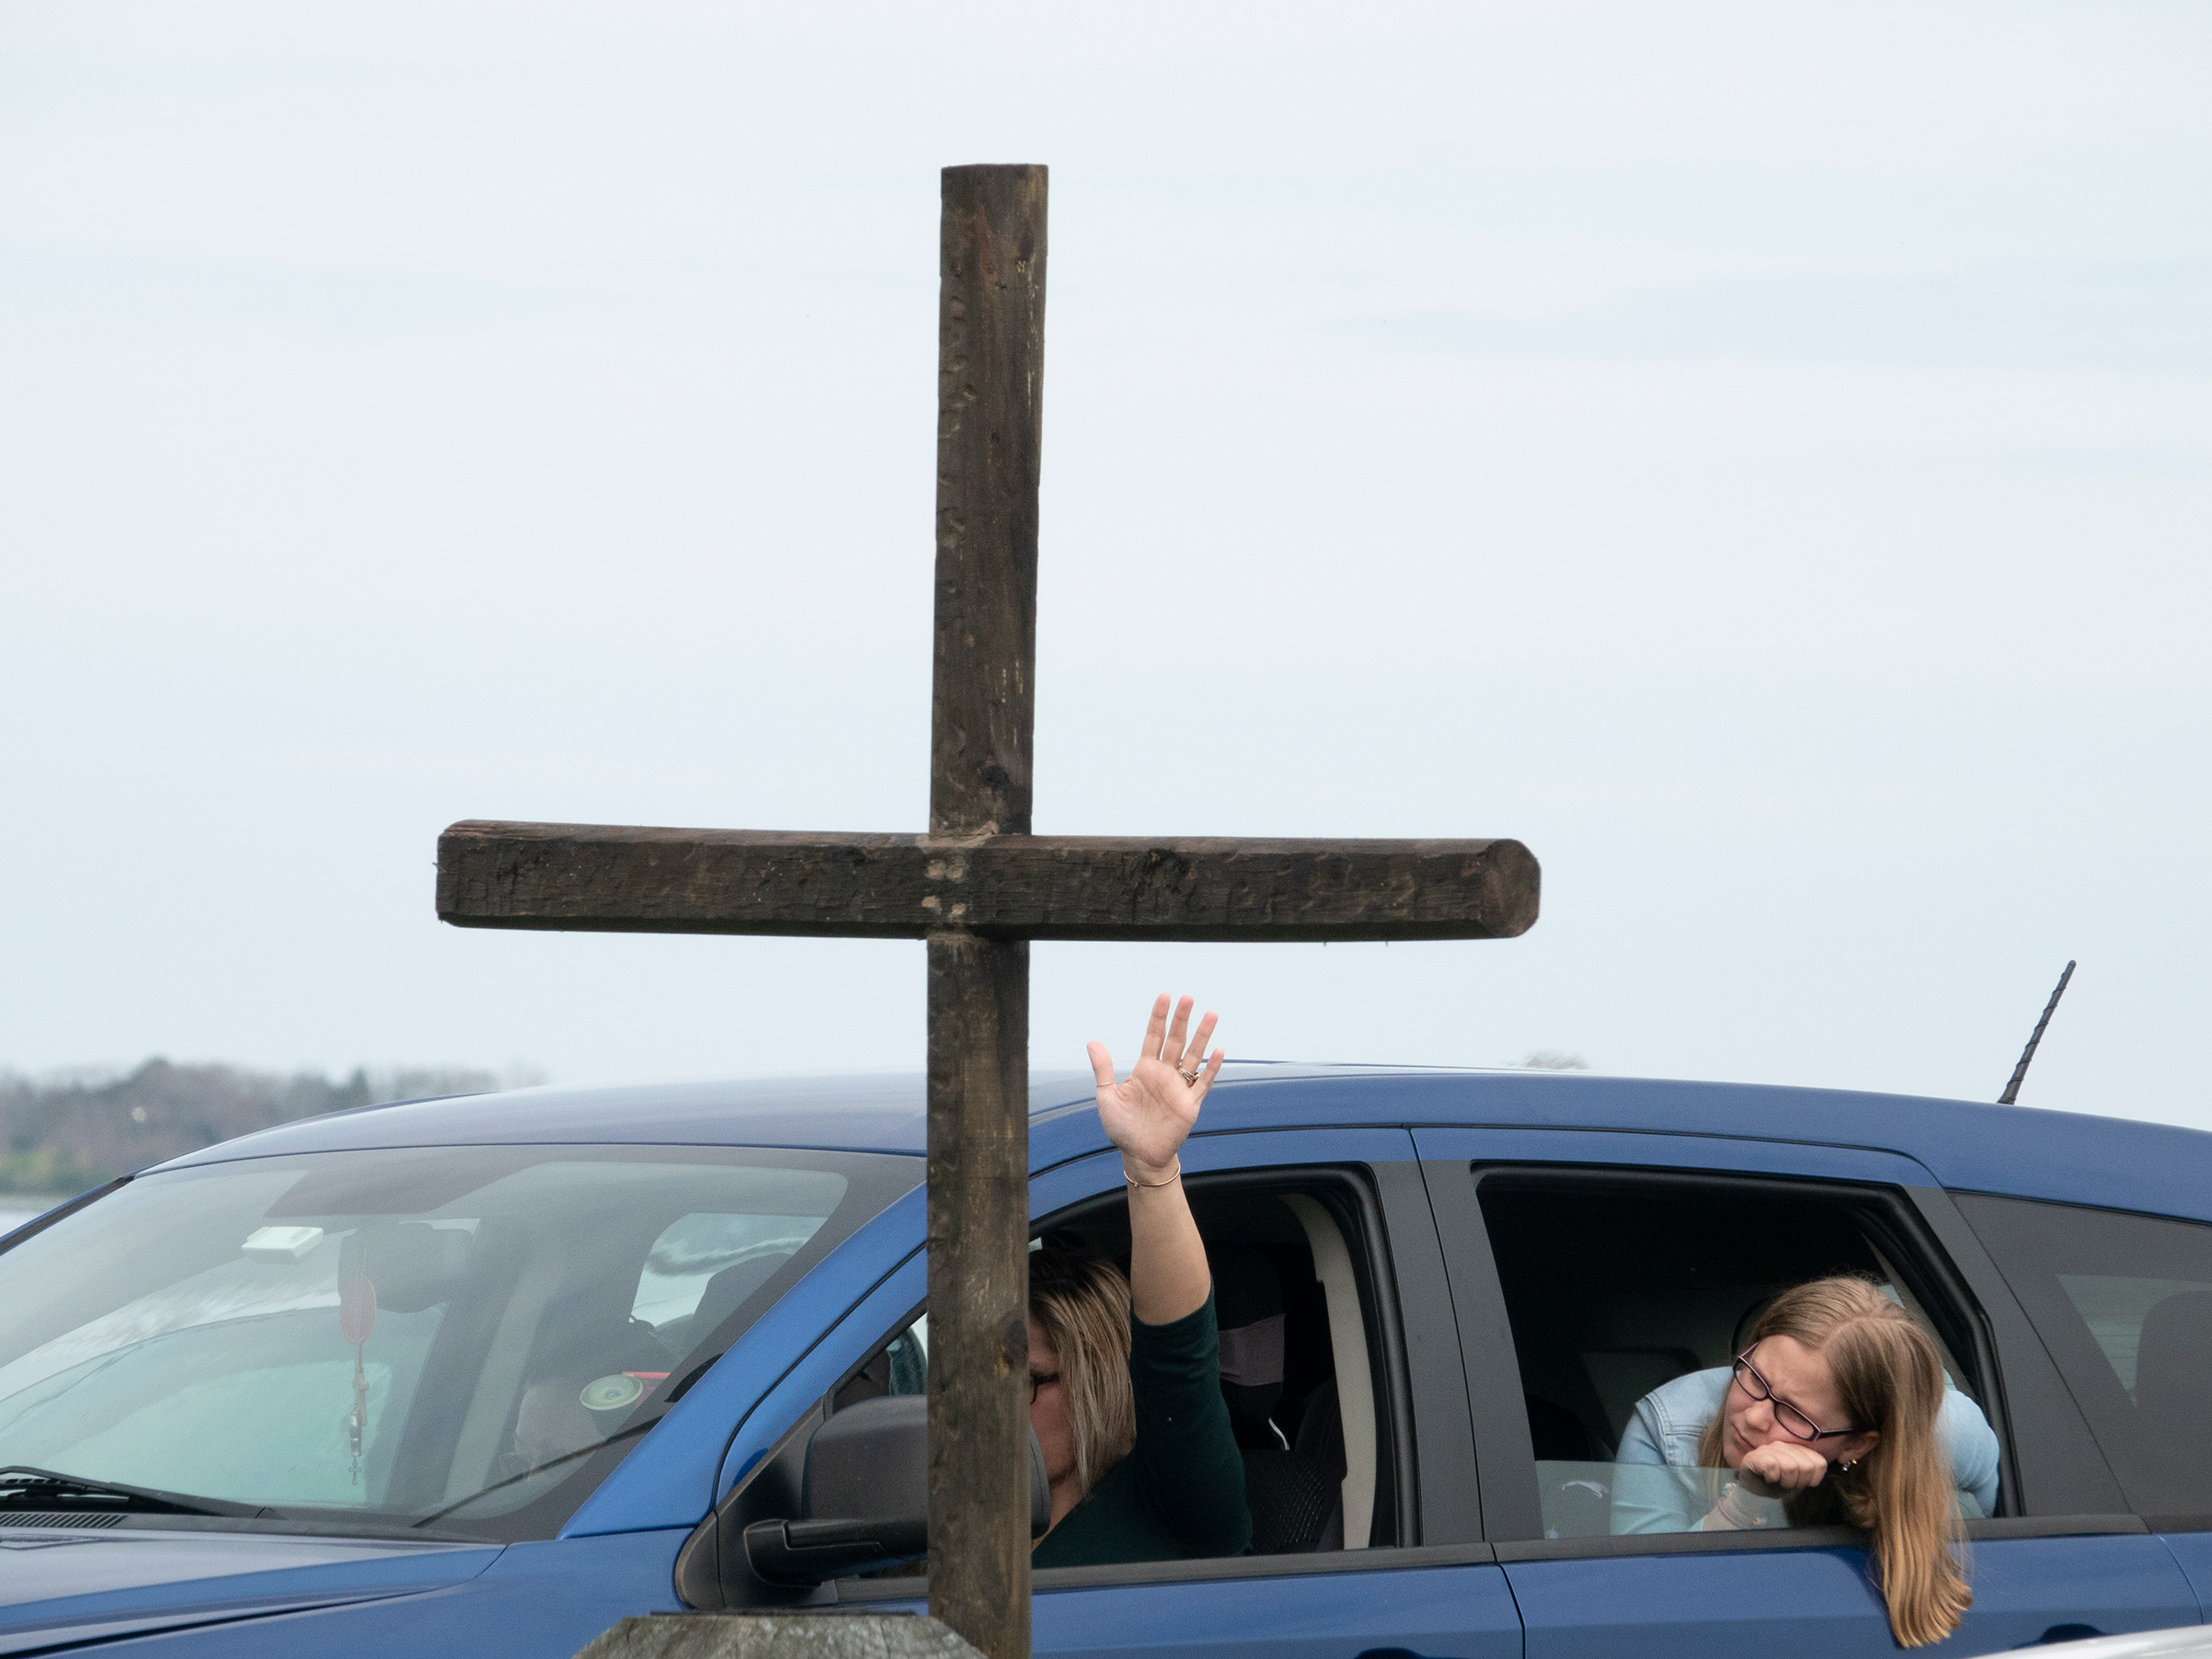 Worshipers pray at Jesus’ Church Sunday "Drive Thru" service in Great Marsh Park, Cambridge, Md., on April 5. (Peter van Agtmael—Magnum Photos for TIME)